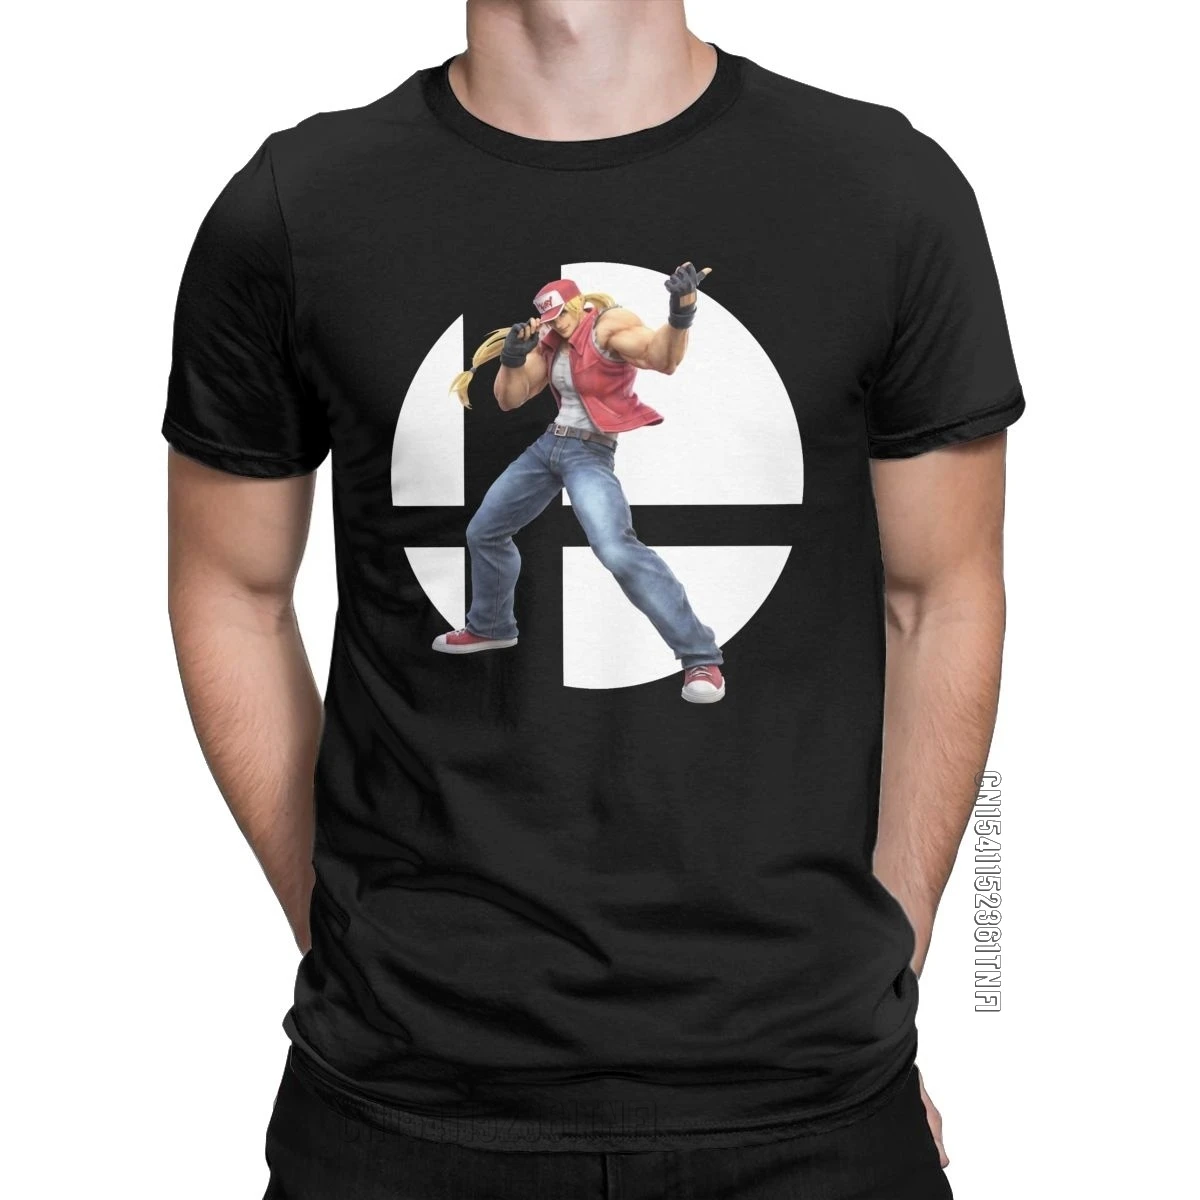 King Of Fighters Terry Bogard Smash Bros T-Shirts For Men 100% Cotton Tee Shirt Crew Neck Classic T Shirts Printed Tops